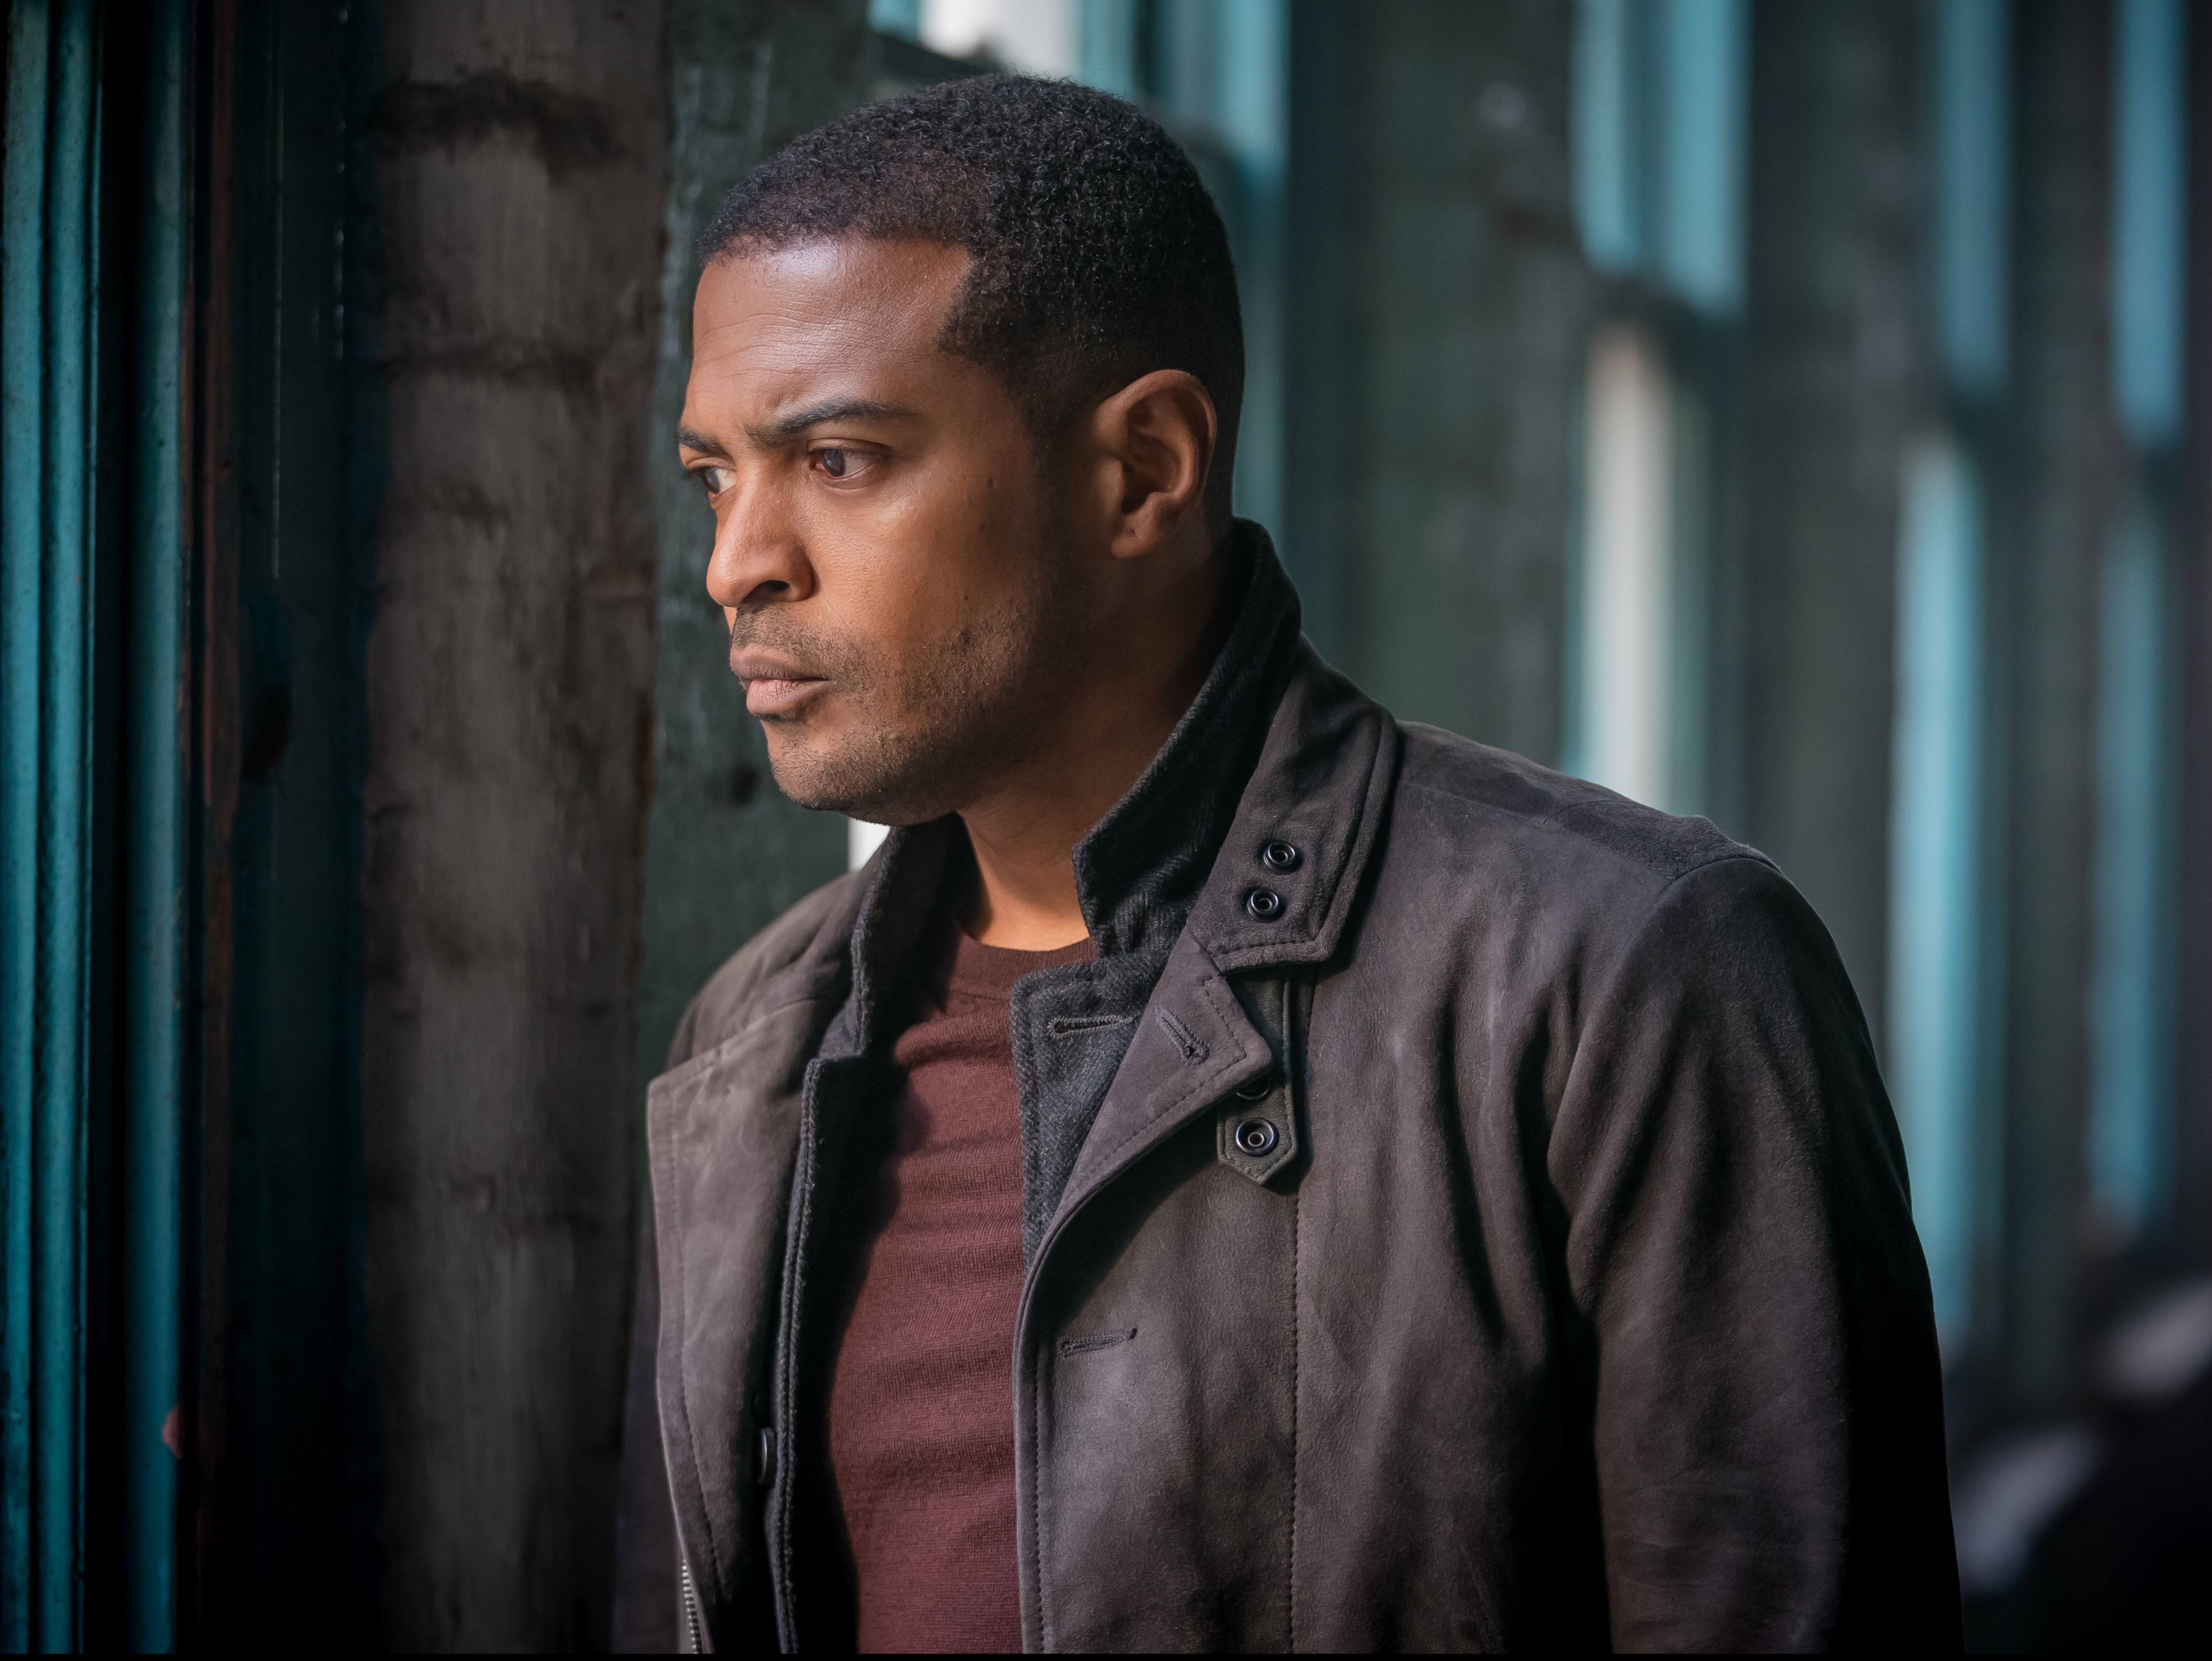 Noel Clarke in ITV drama ‘Viewpoint’, the final chapter of which has been pulled from schedules